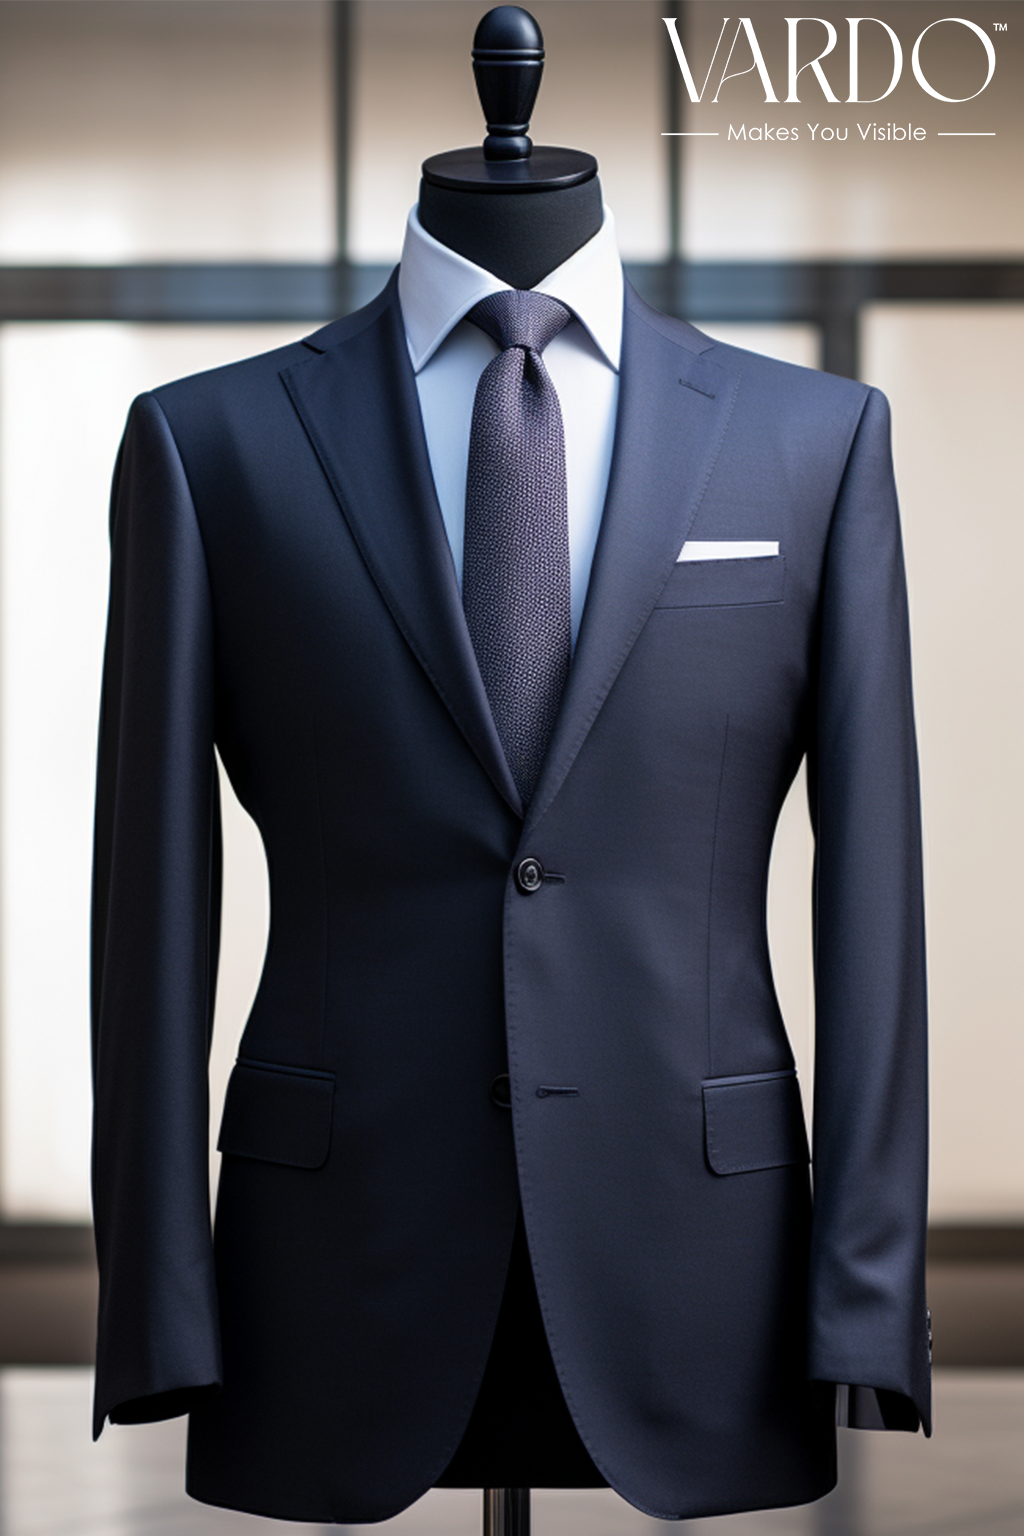 Blue Suits for Men, Navy & Dark Blue Available